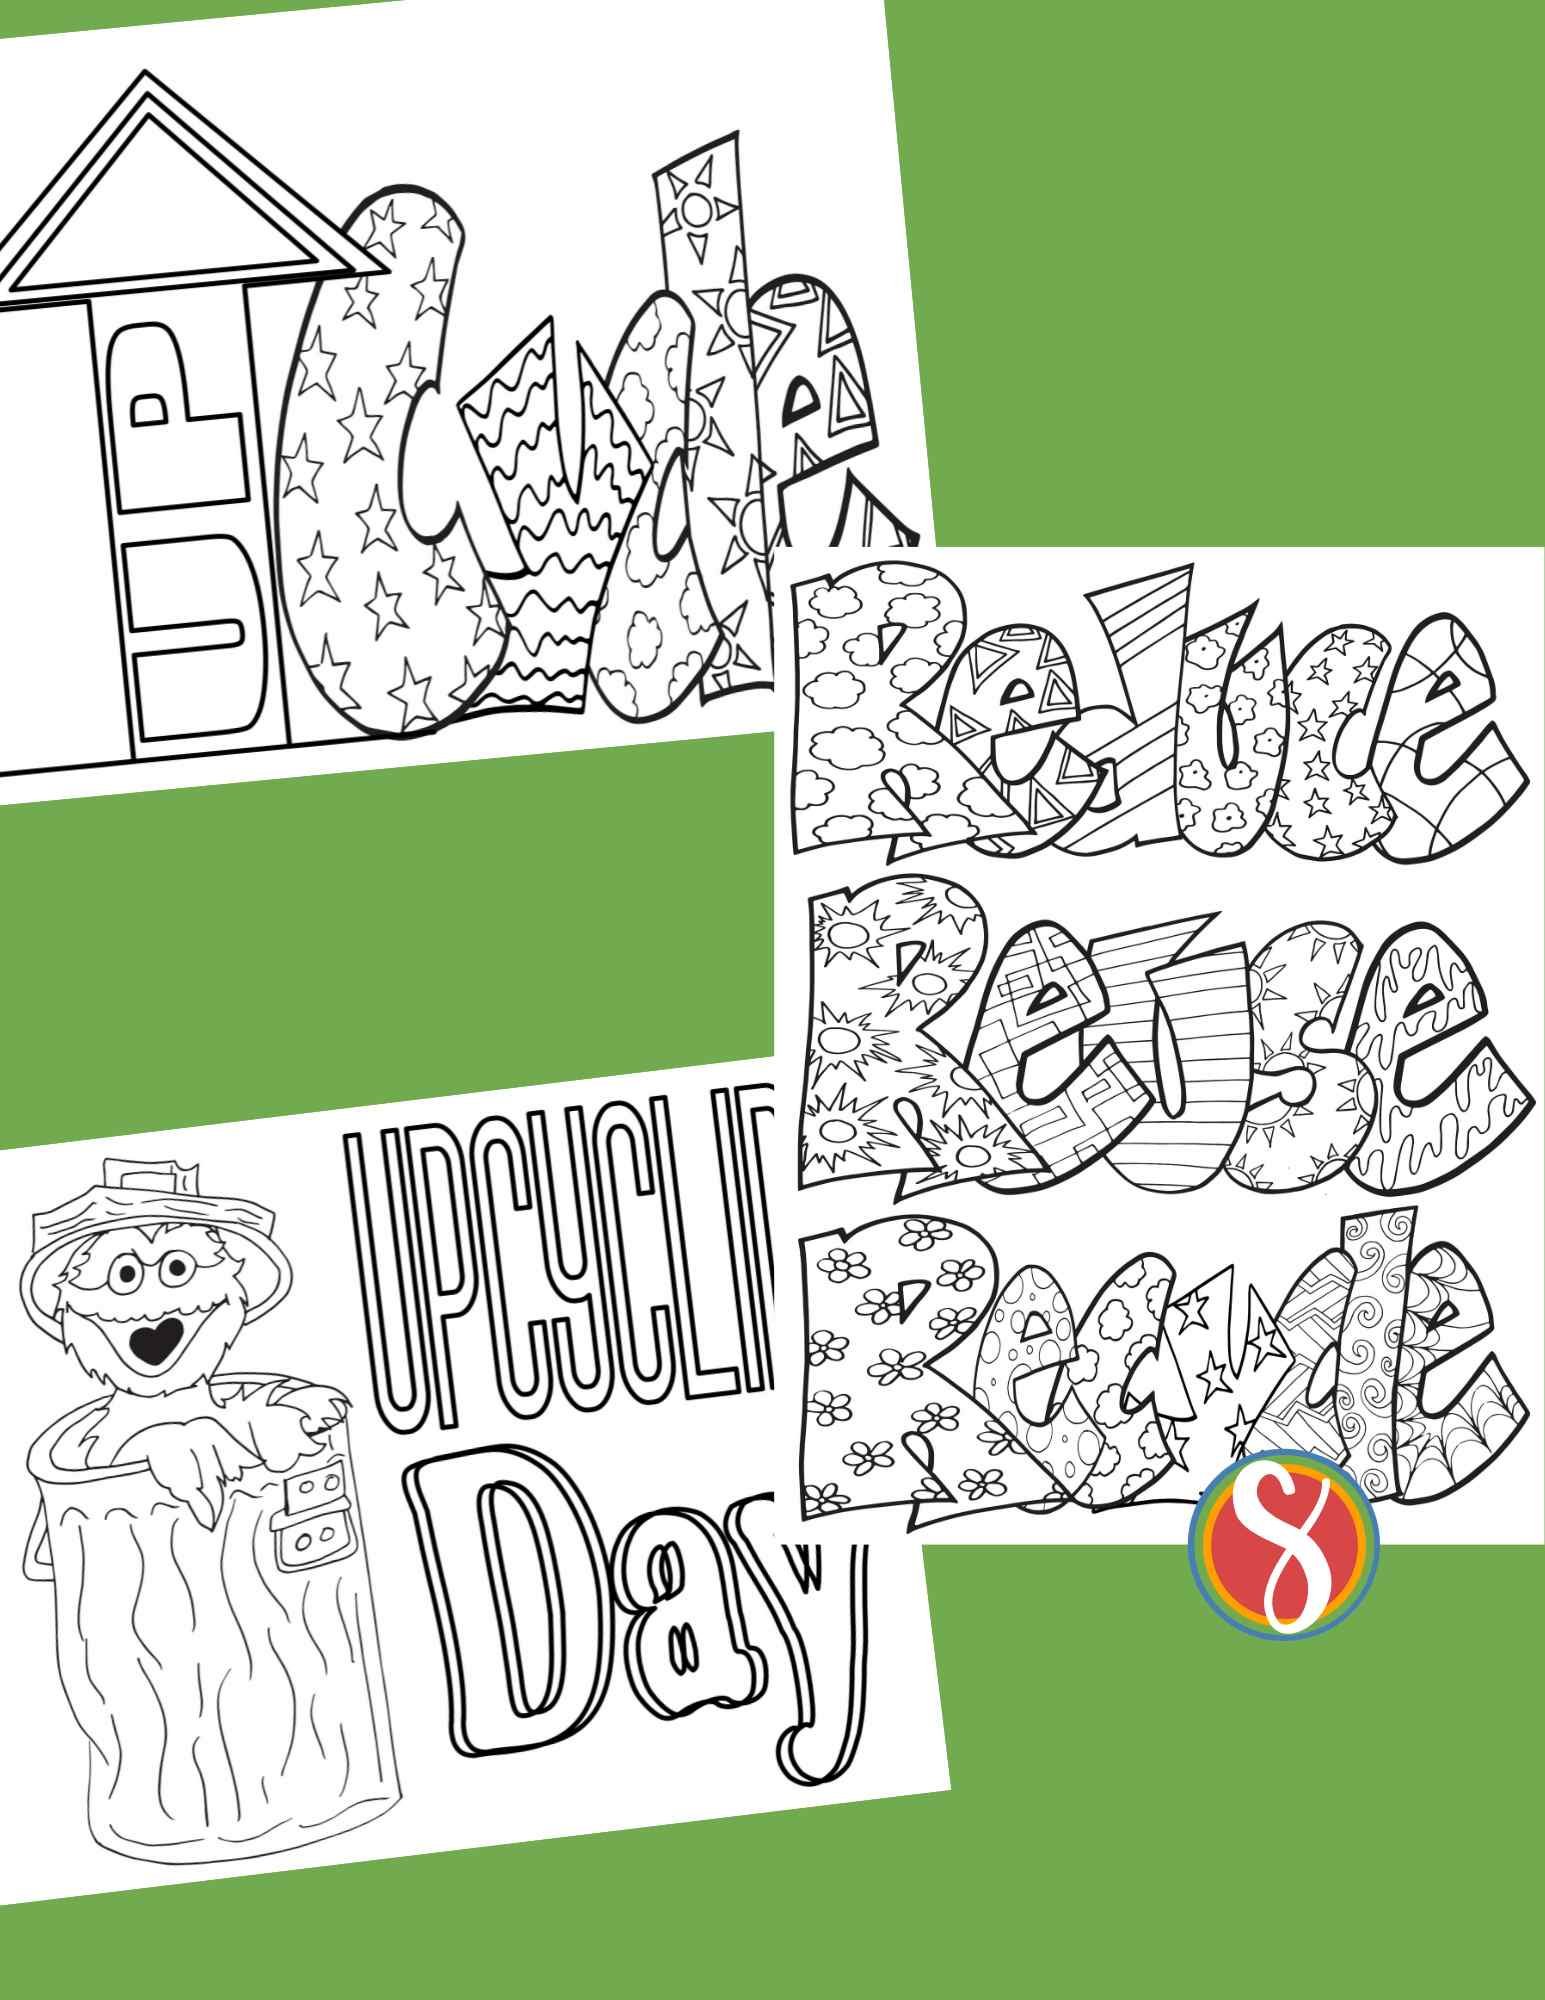 Free reduce reuse recycle coloring pages â stevie doodles